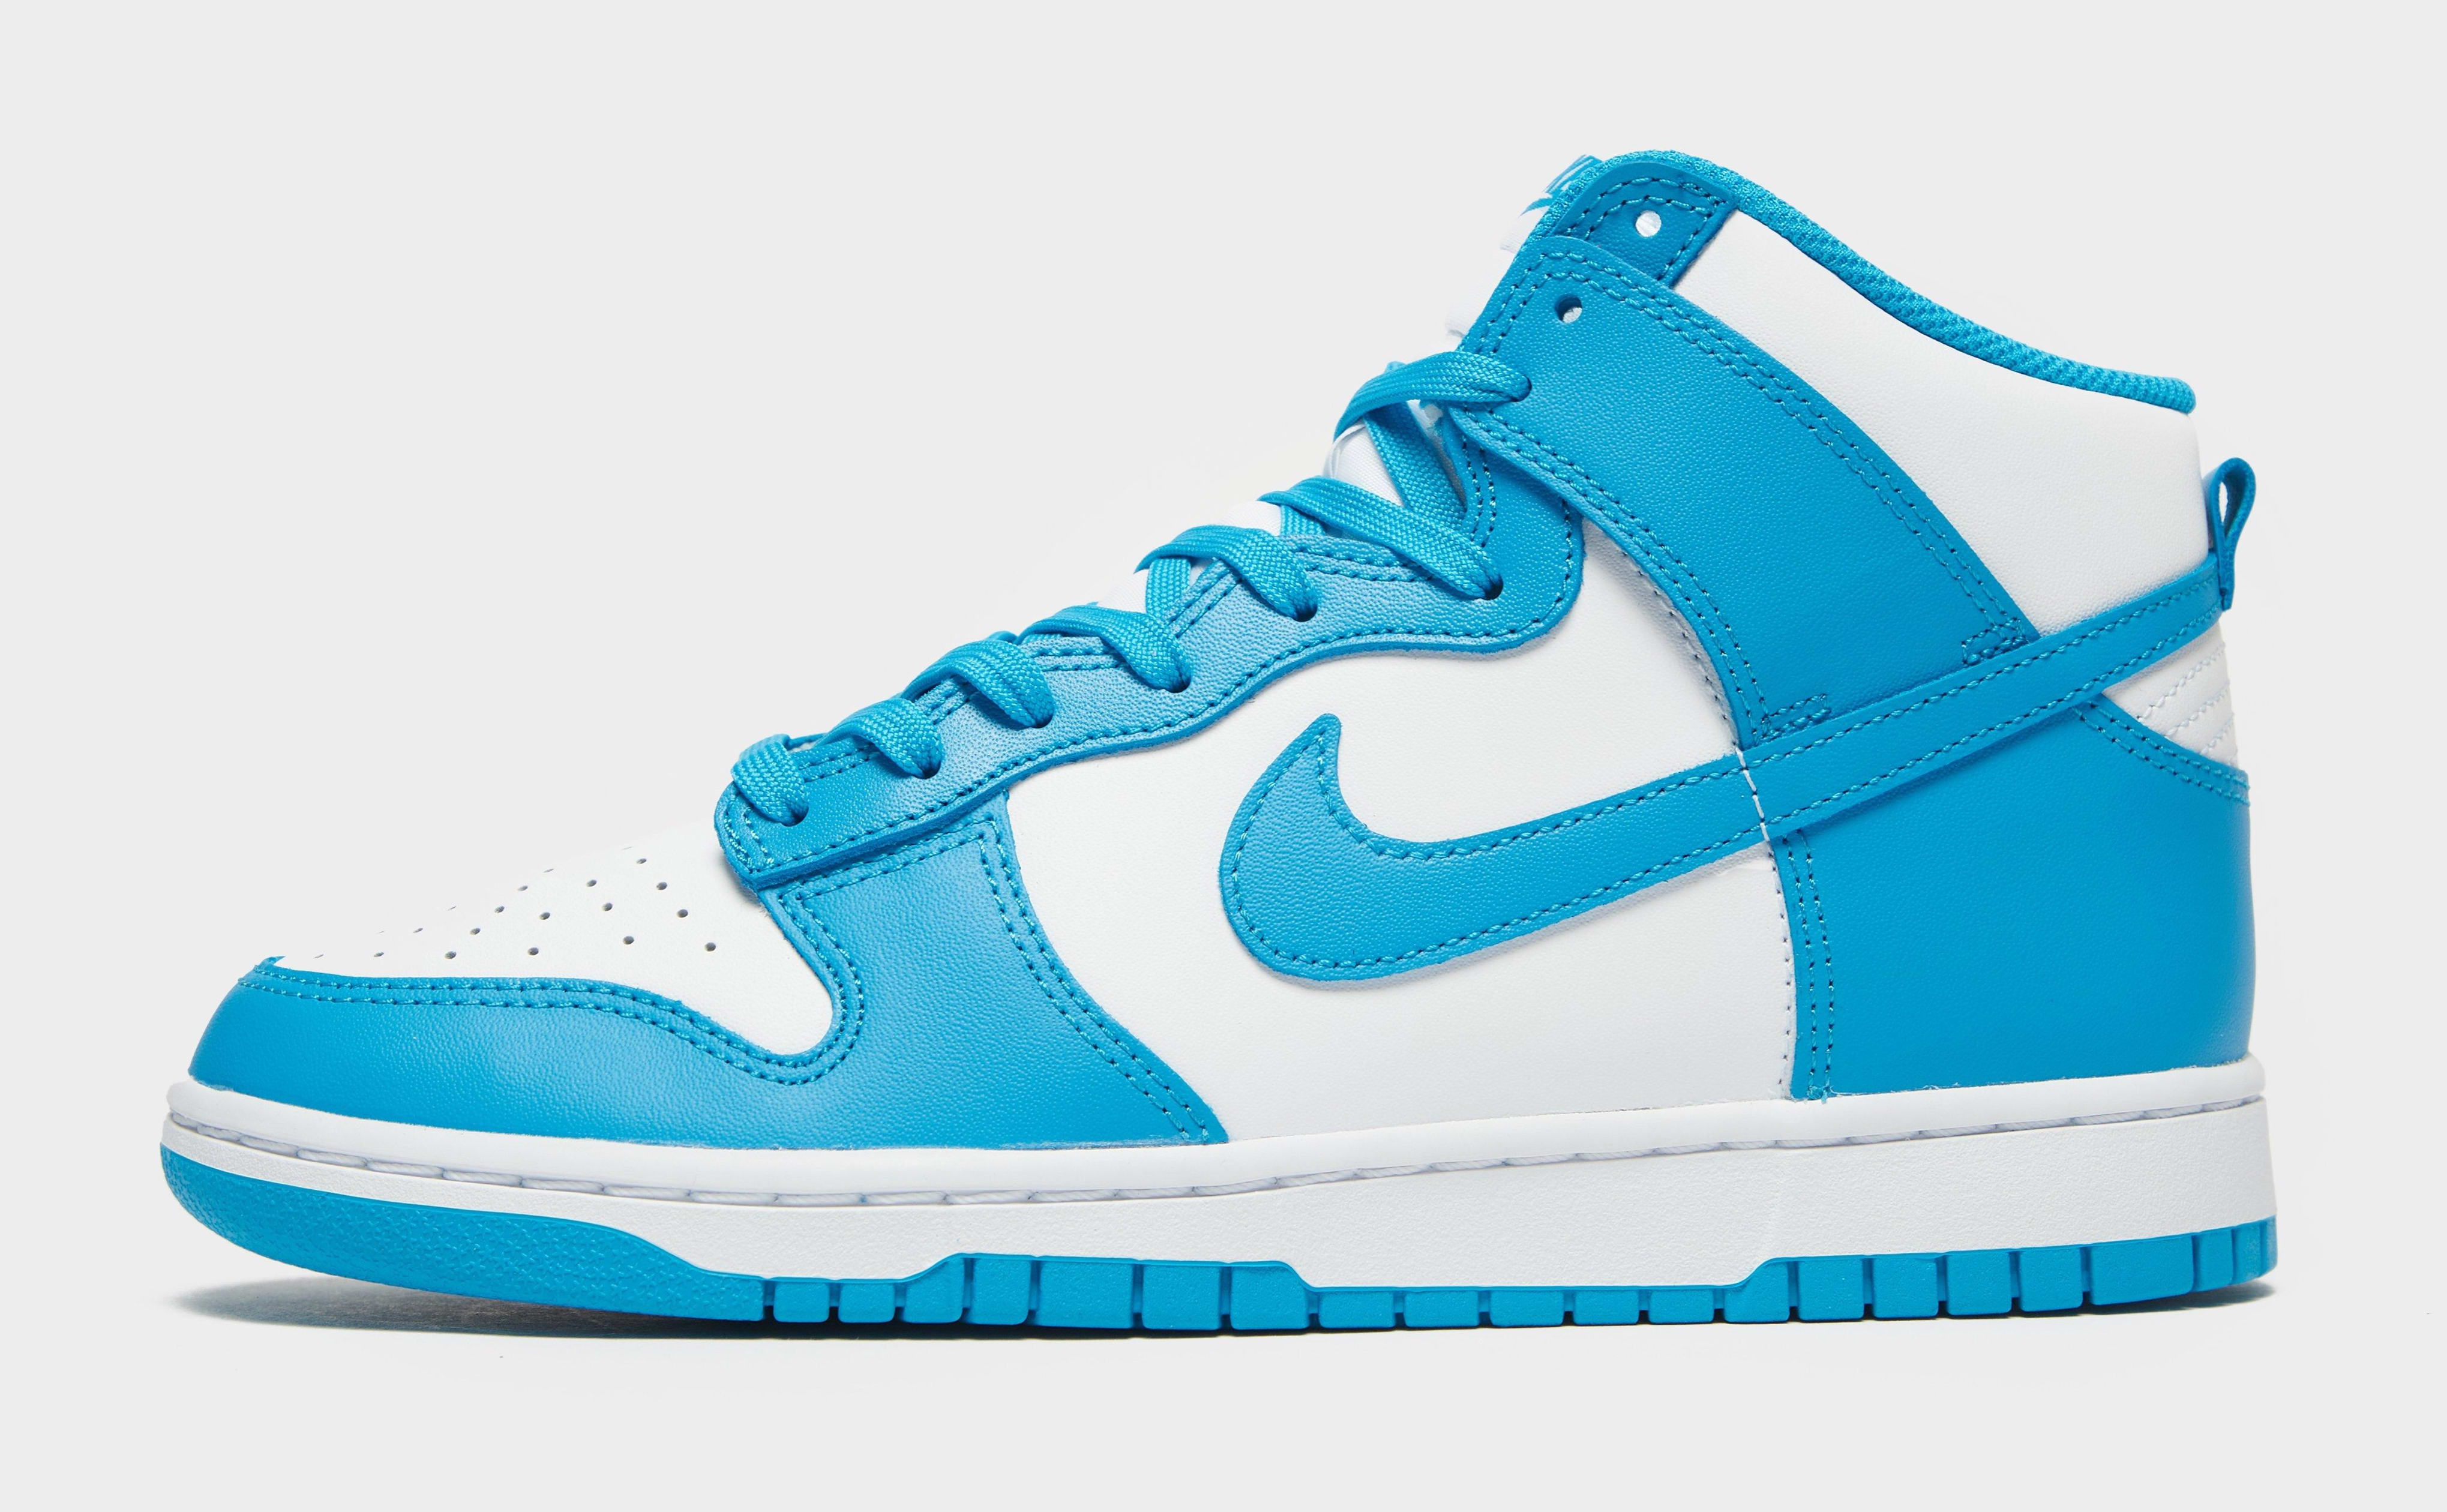 Nike Dunk High 'Laser Blue' Lateral